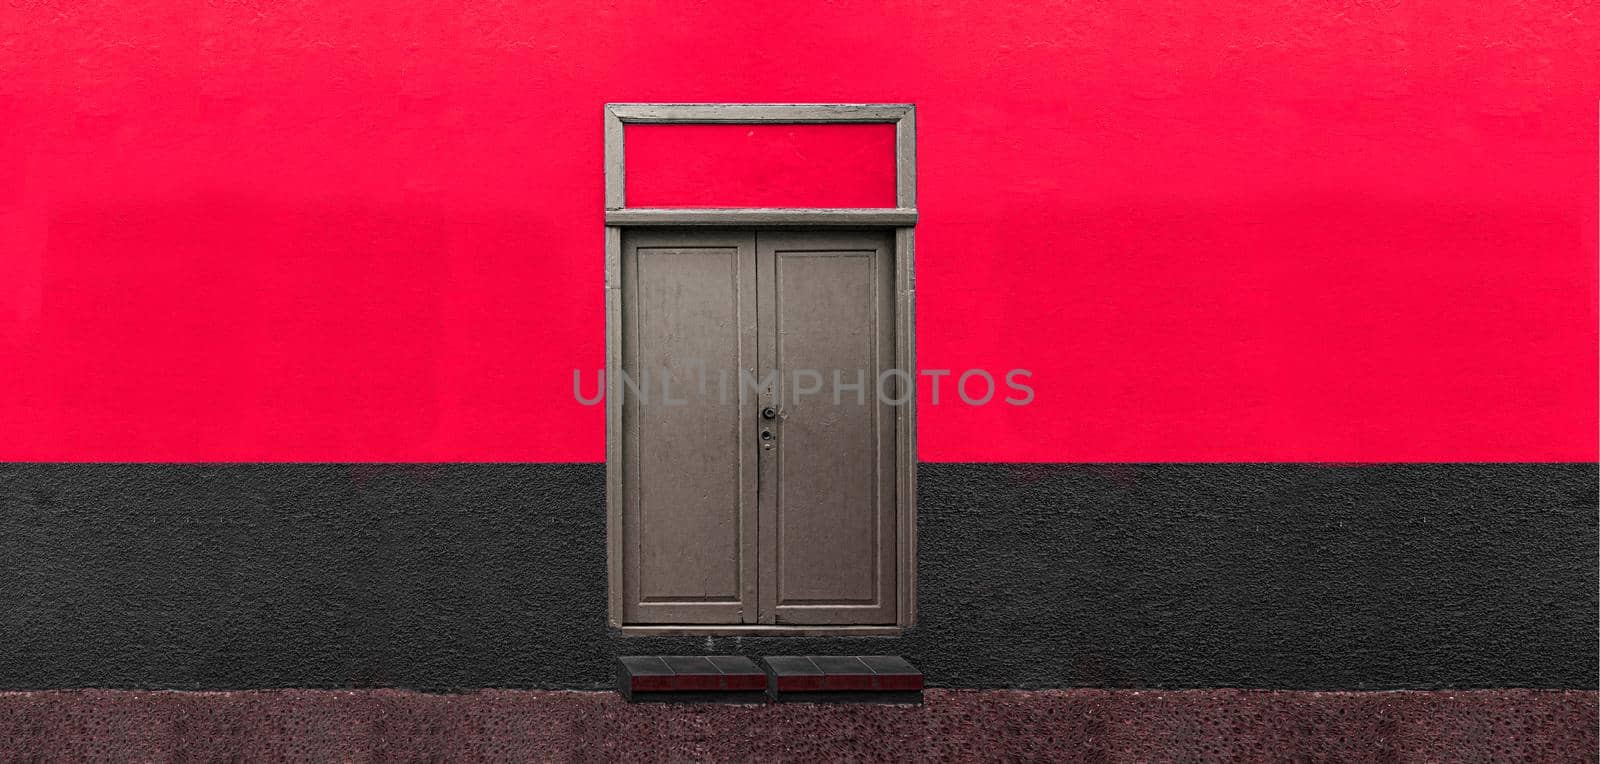 wooden door on red wall, door details on colored wall by isaiphoto